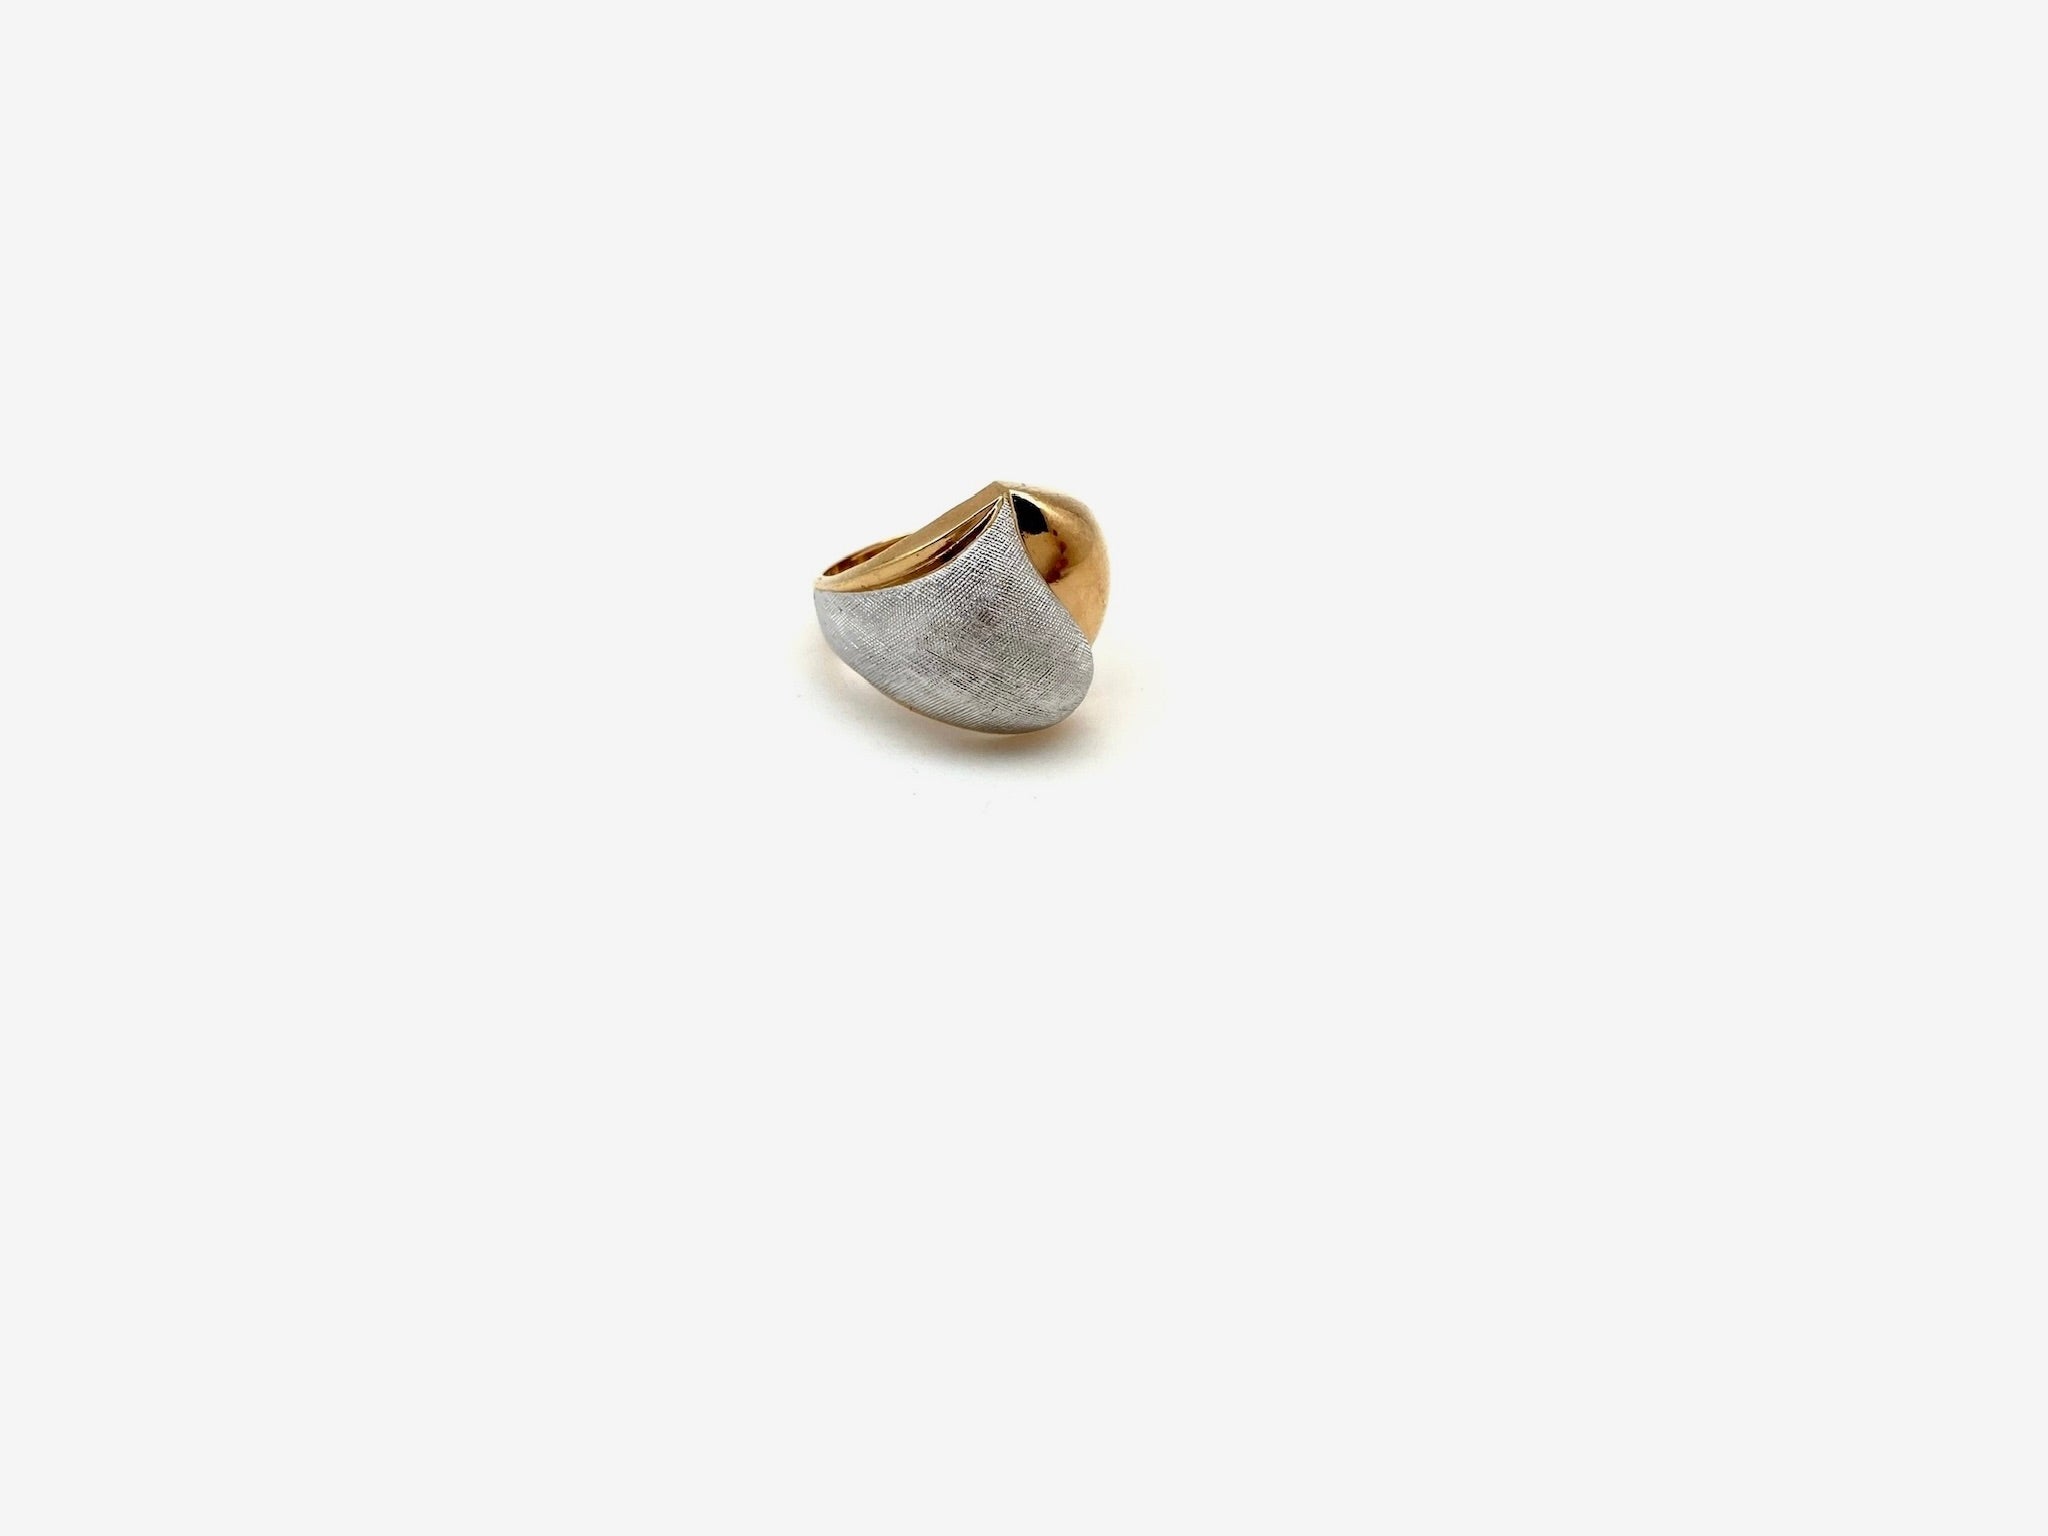 Sun-up Vintage Dome Ring - Stone Cooper